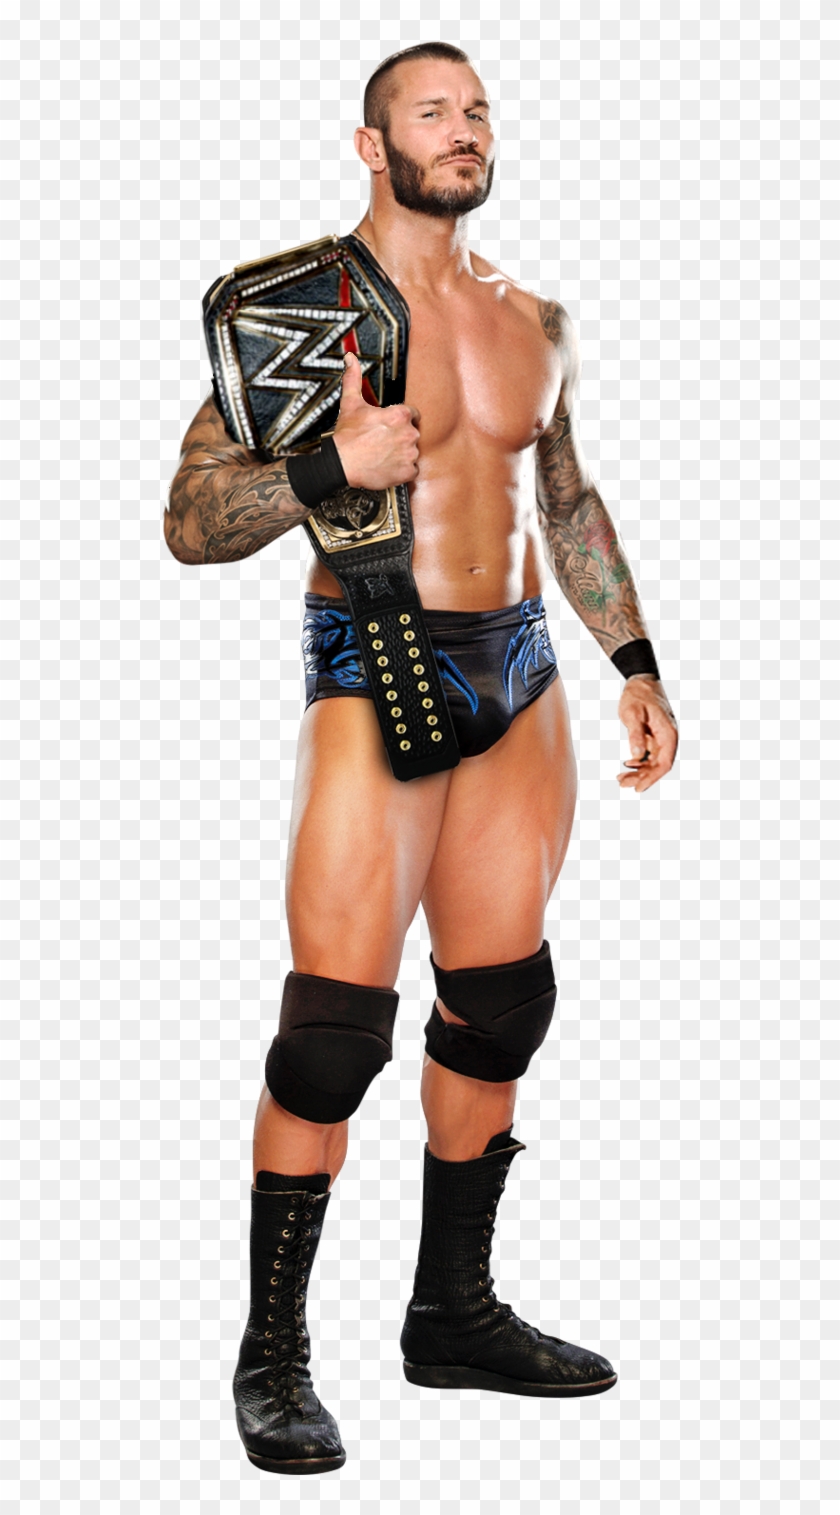 Randy Orton Clipart - Png Download